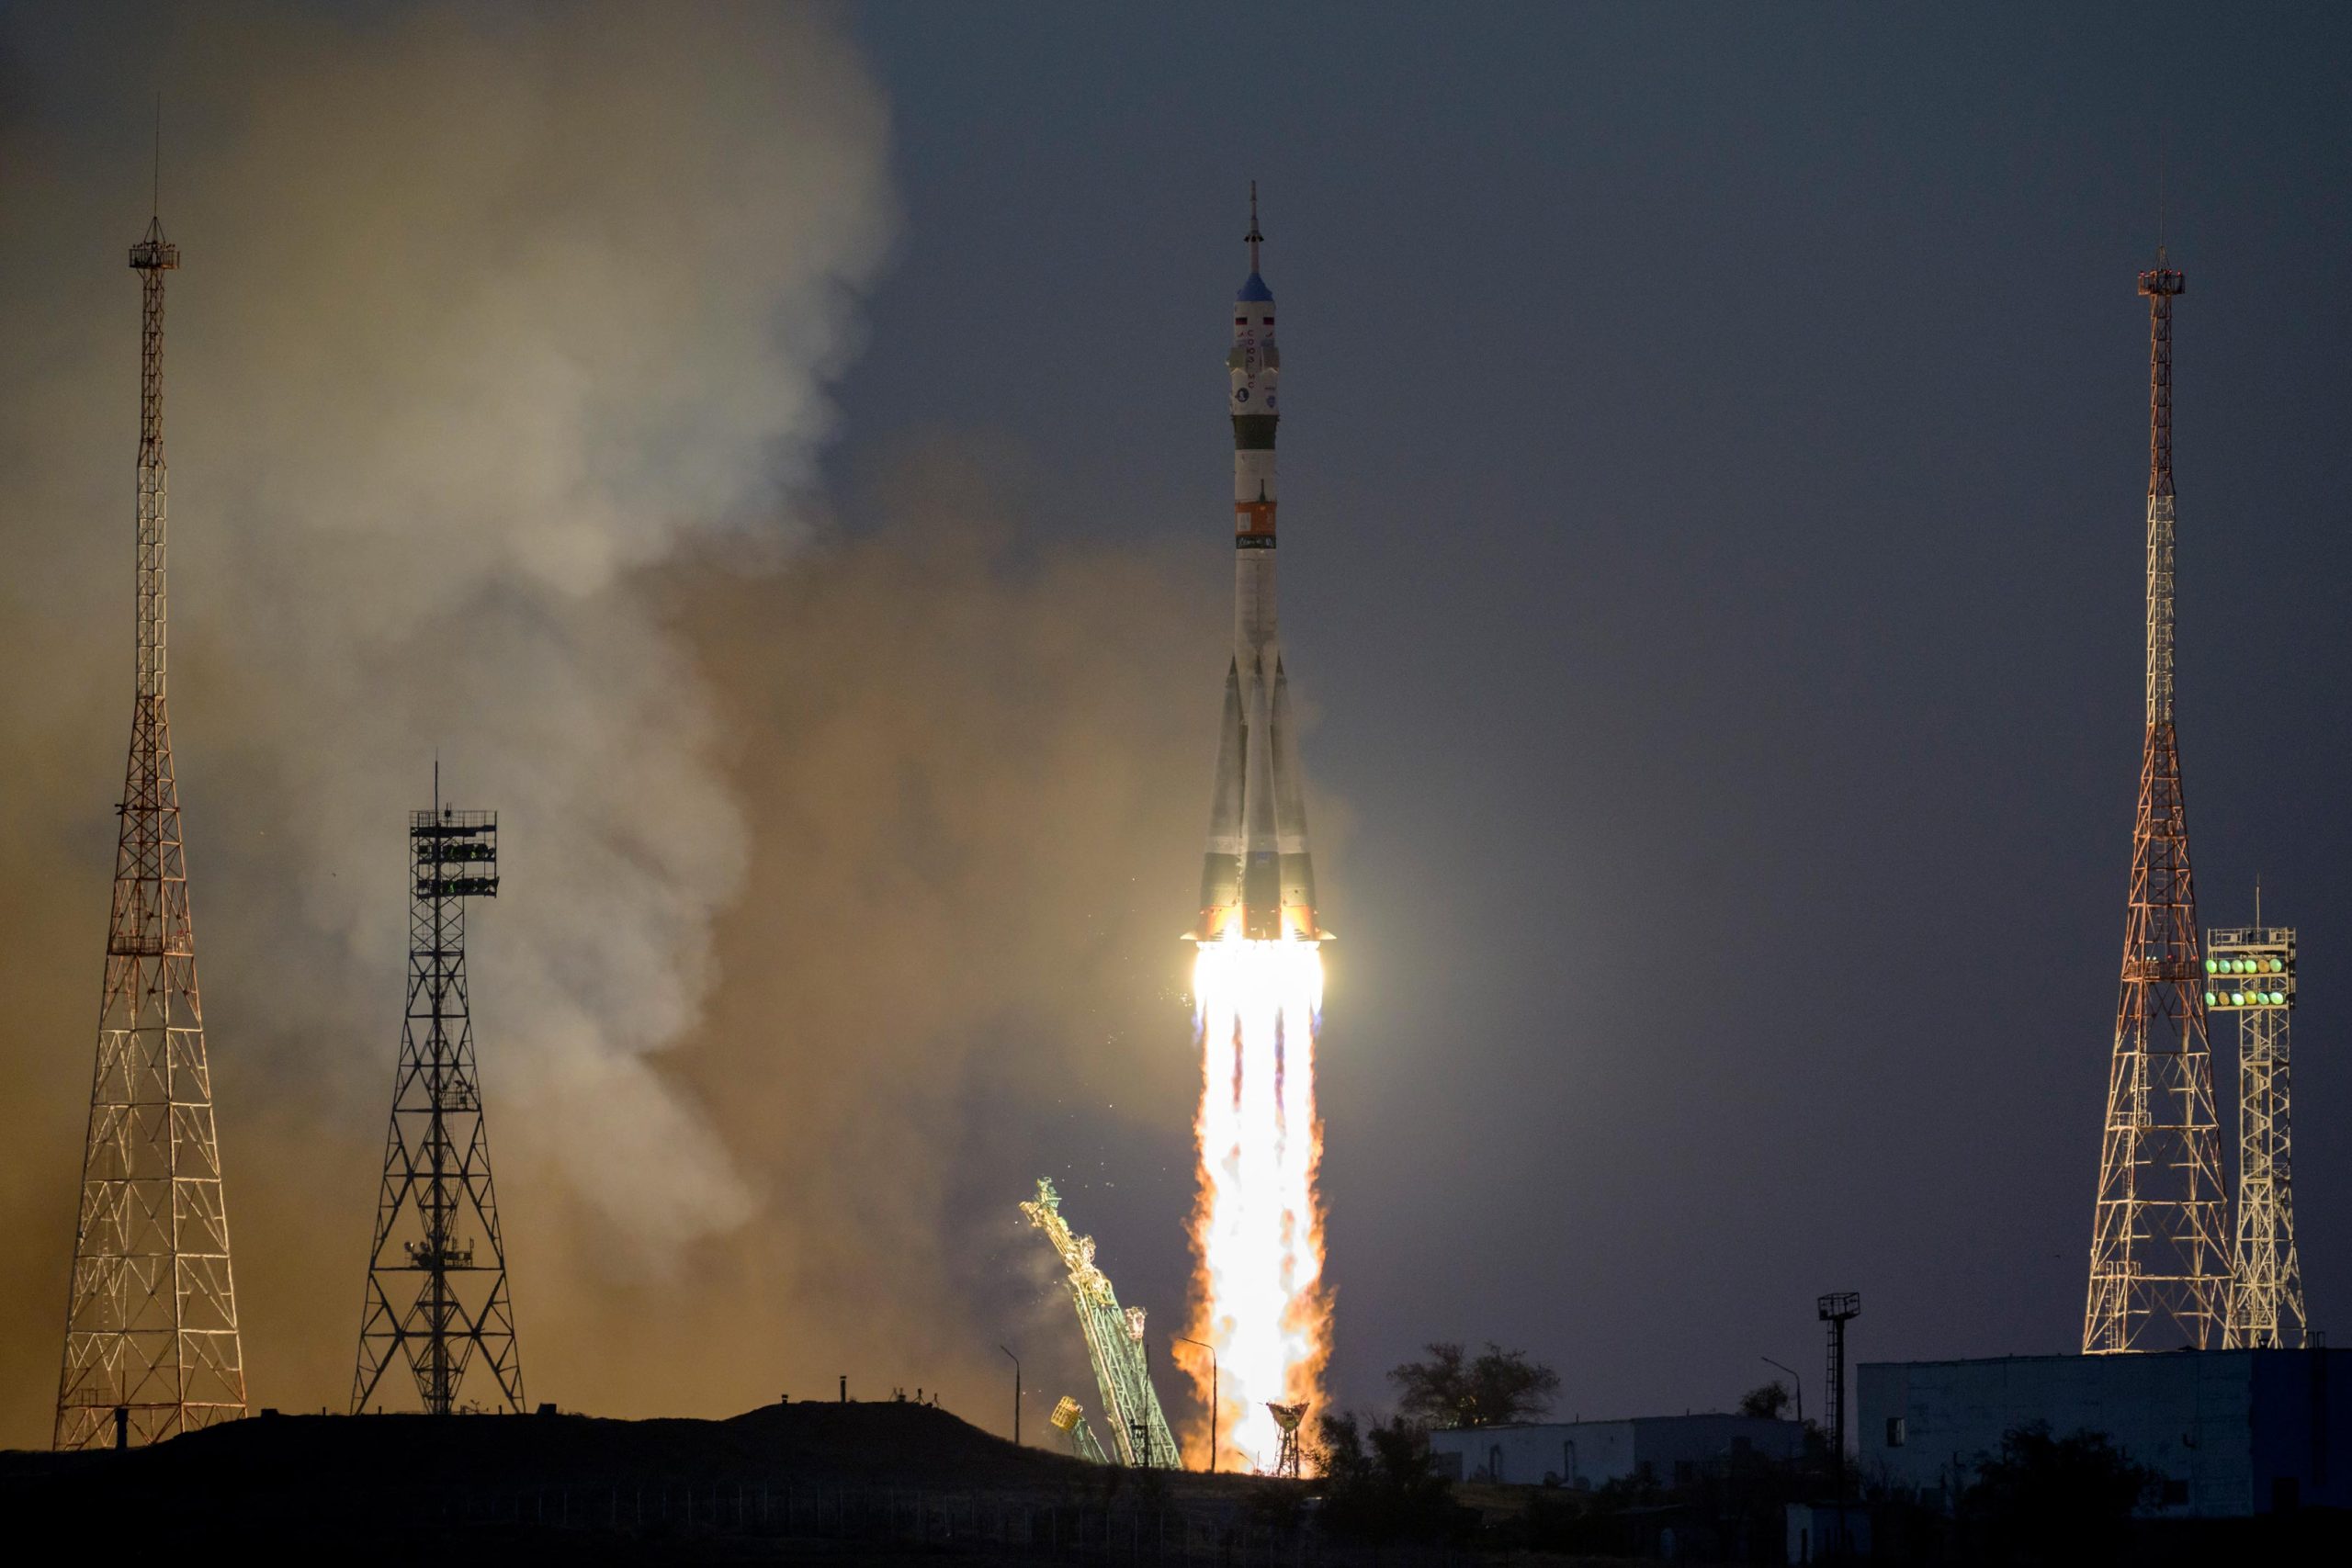 The International Space Station prepares near the launch of the Roscosmos and SpaceX crew ships